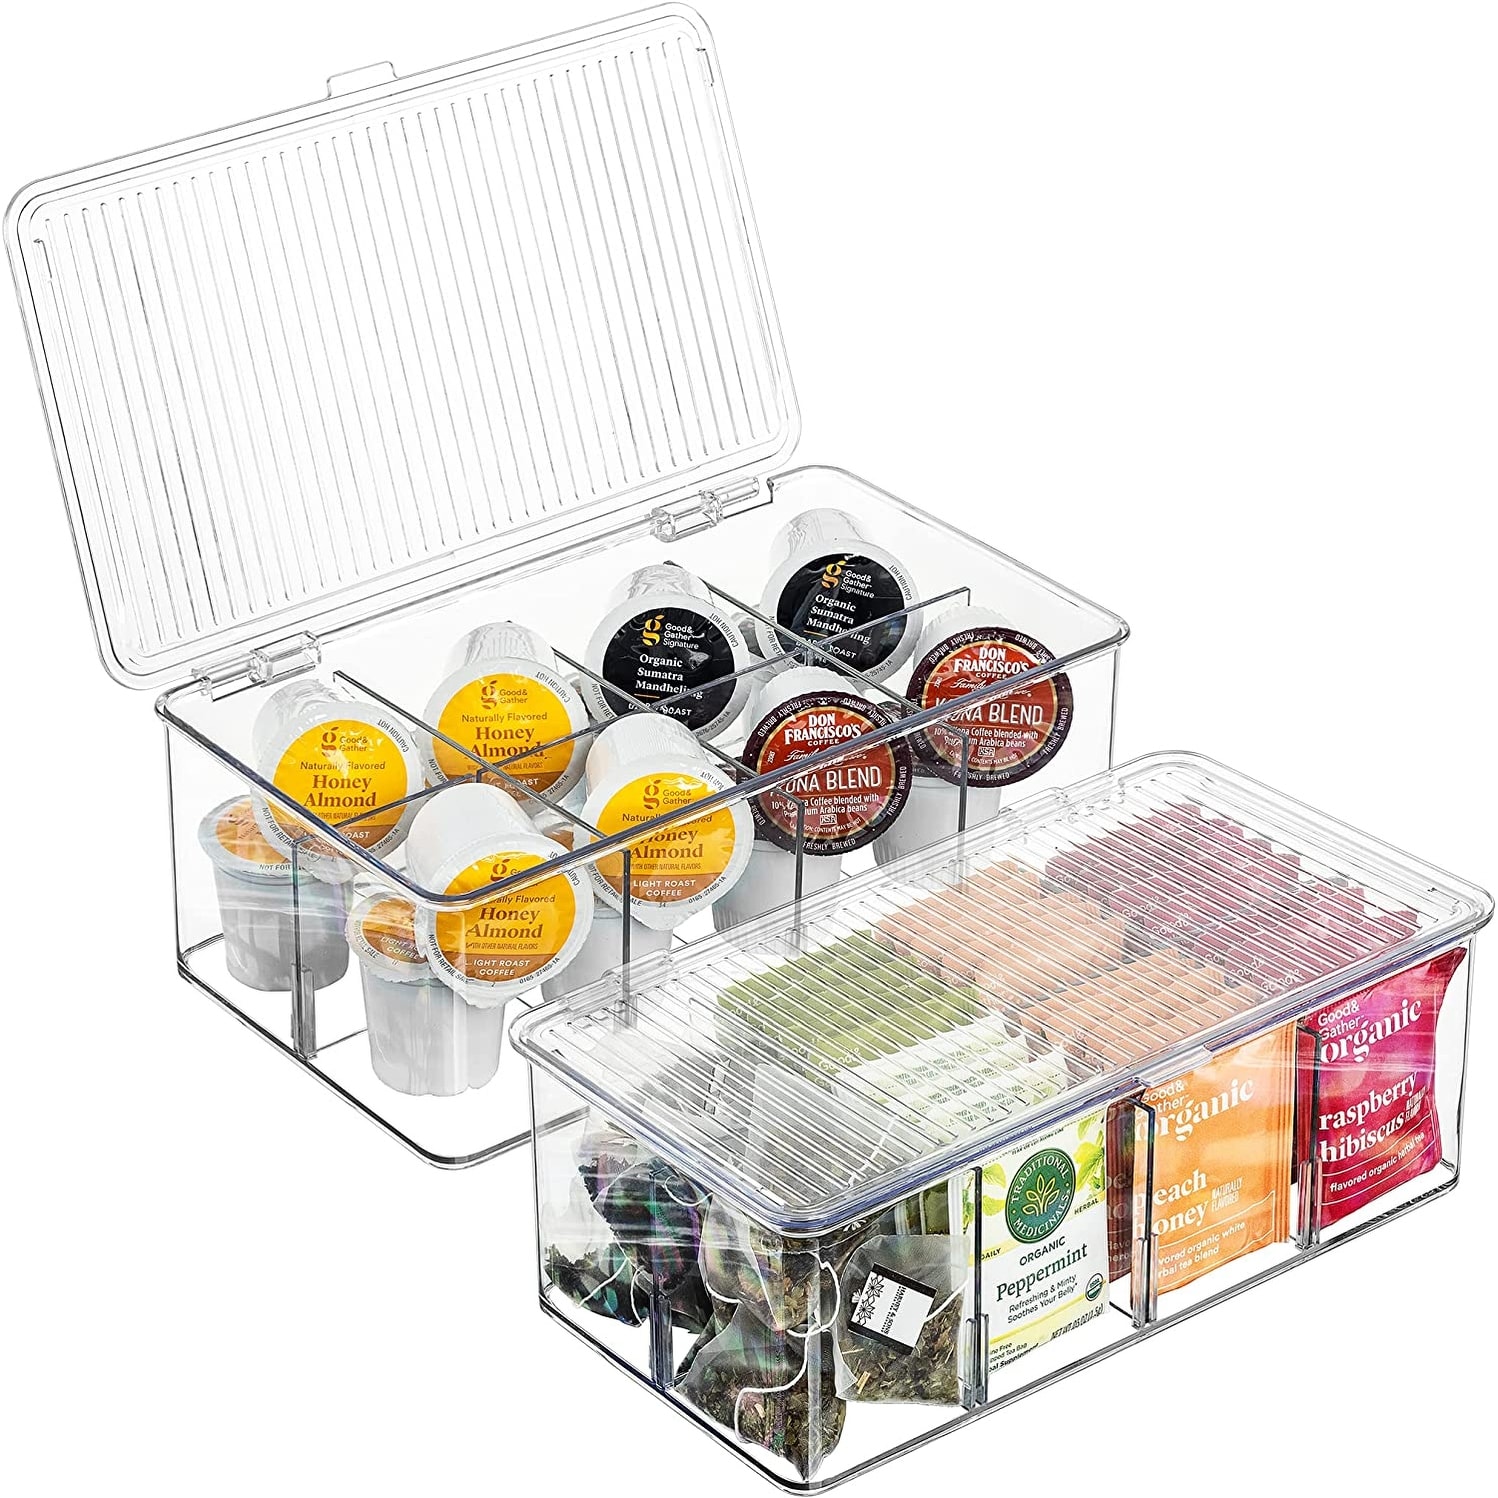 https://ak1.ostkcdn.com/images/products/is/images/direct/733659dc7baf37d8878fdf2daf755d2019f53b31/Sorbus-Organizer-Bins%2C-with-lids-%26-Removable-Compartments%2C-Kitchen-Pantry-Organization-Storage-bins-with-Dividers.jpg